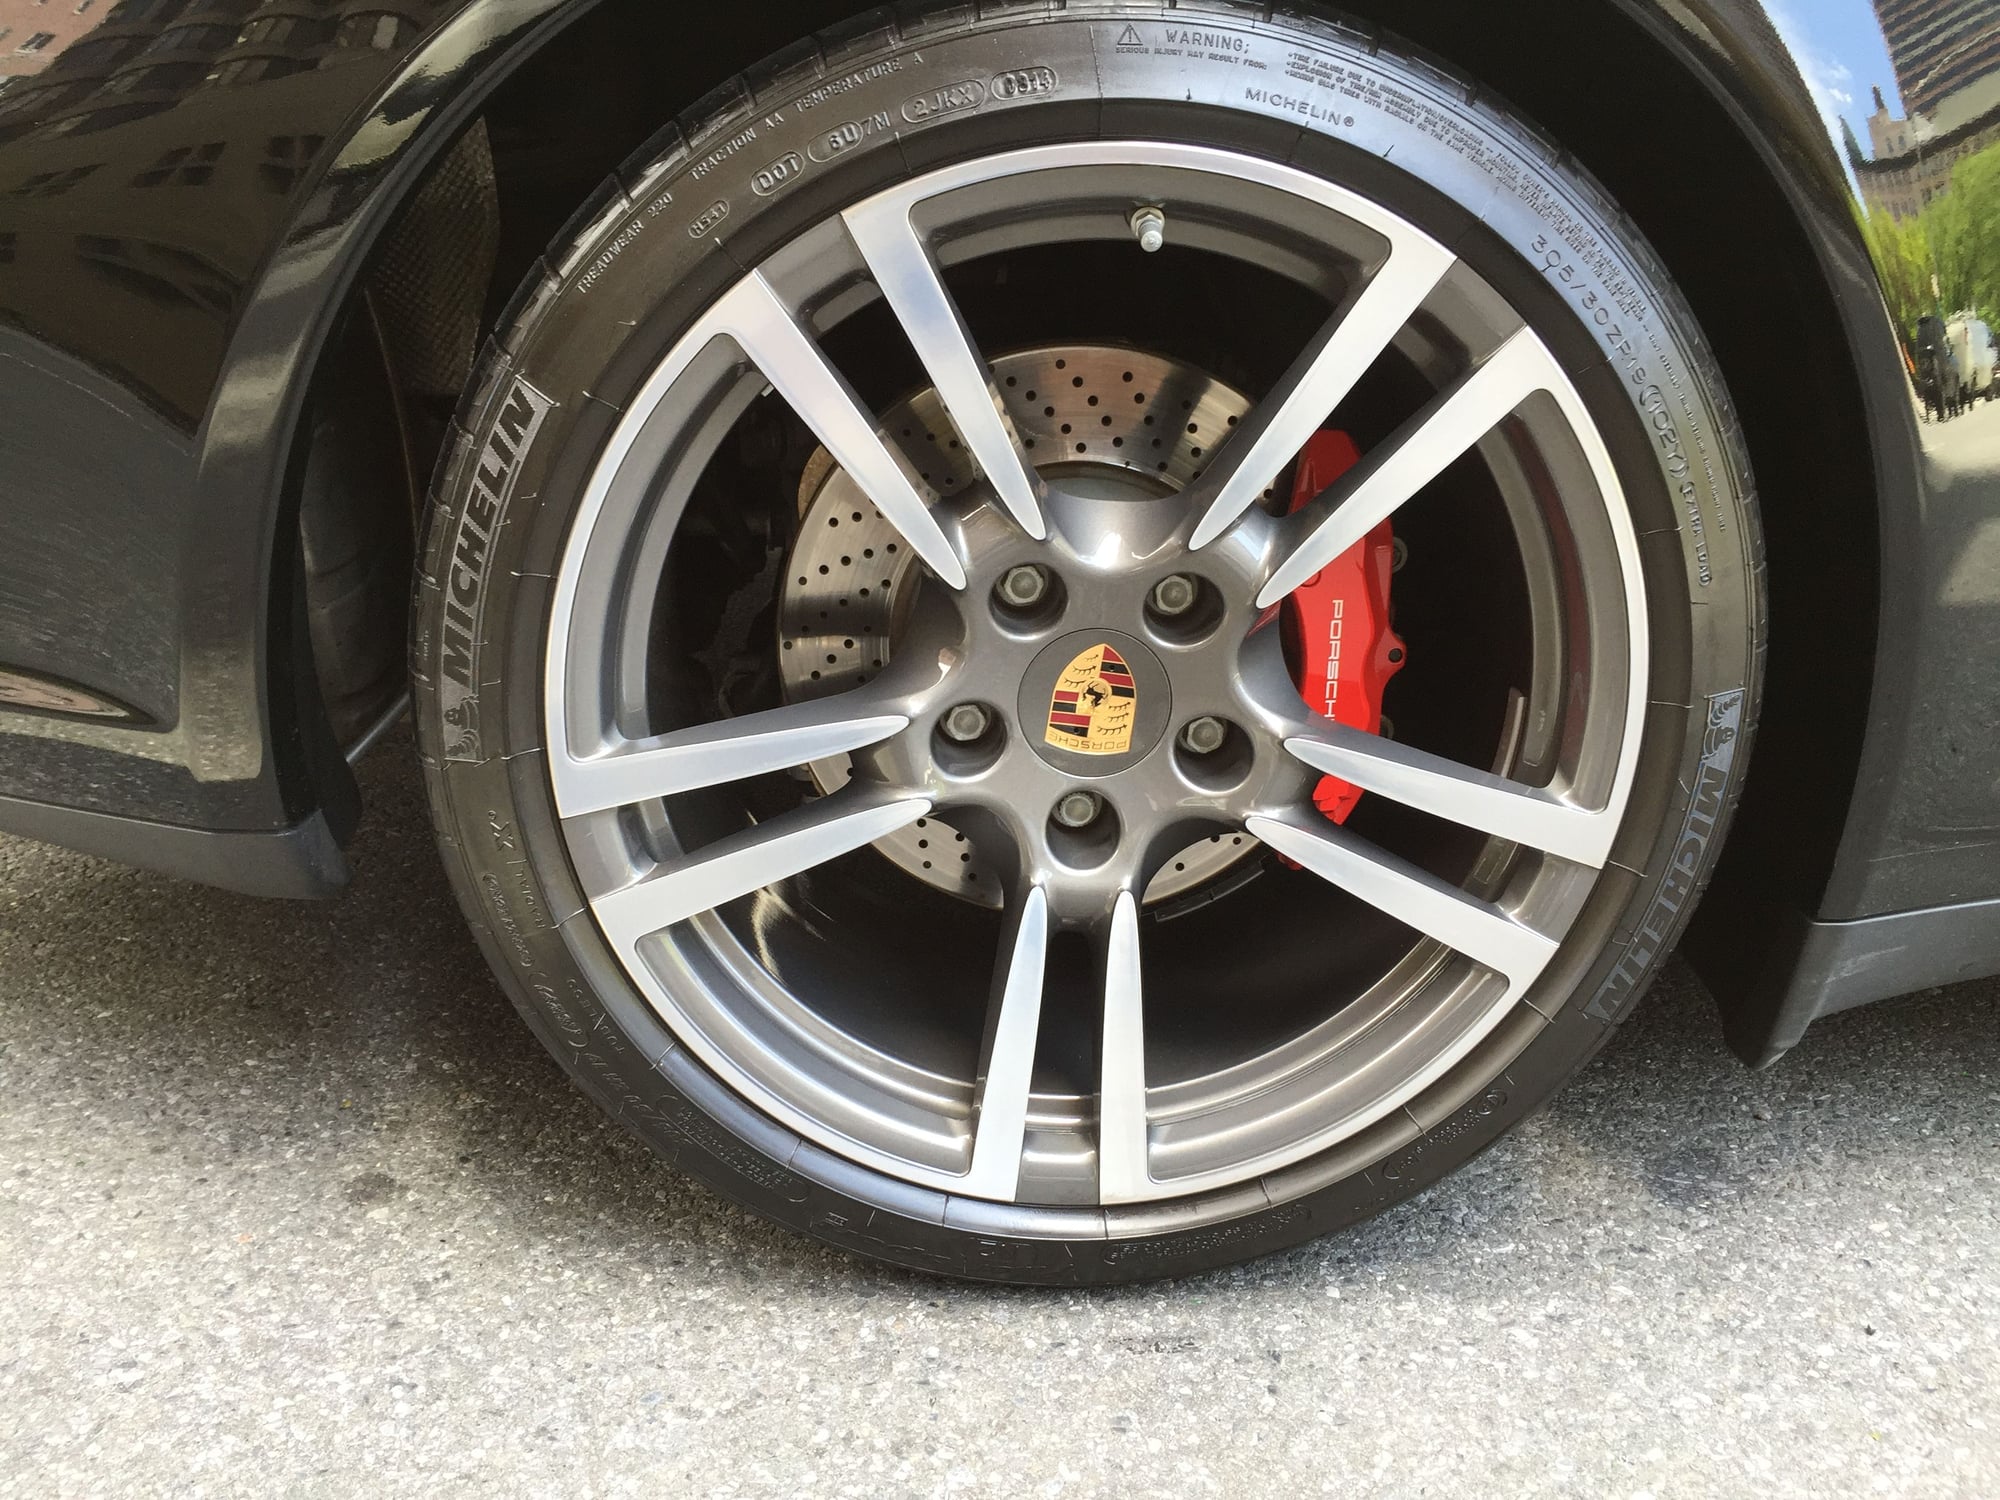 Wheels and Tires/Axles - Like new set of OEM Porsche Turbo II style wheels - Used - 2005 to 2012 Porsche 911 - New York, NY 10016, United States